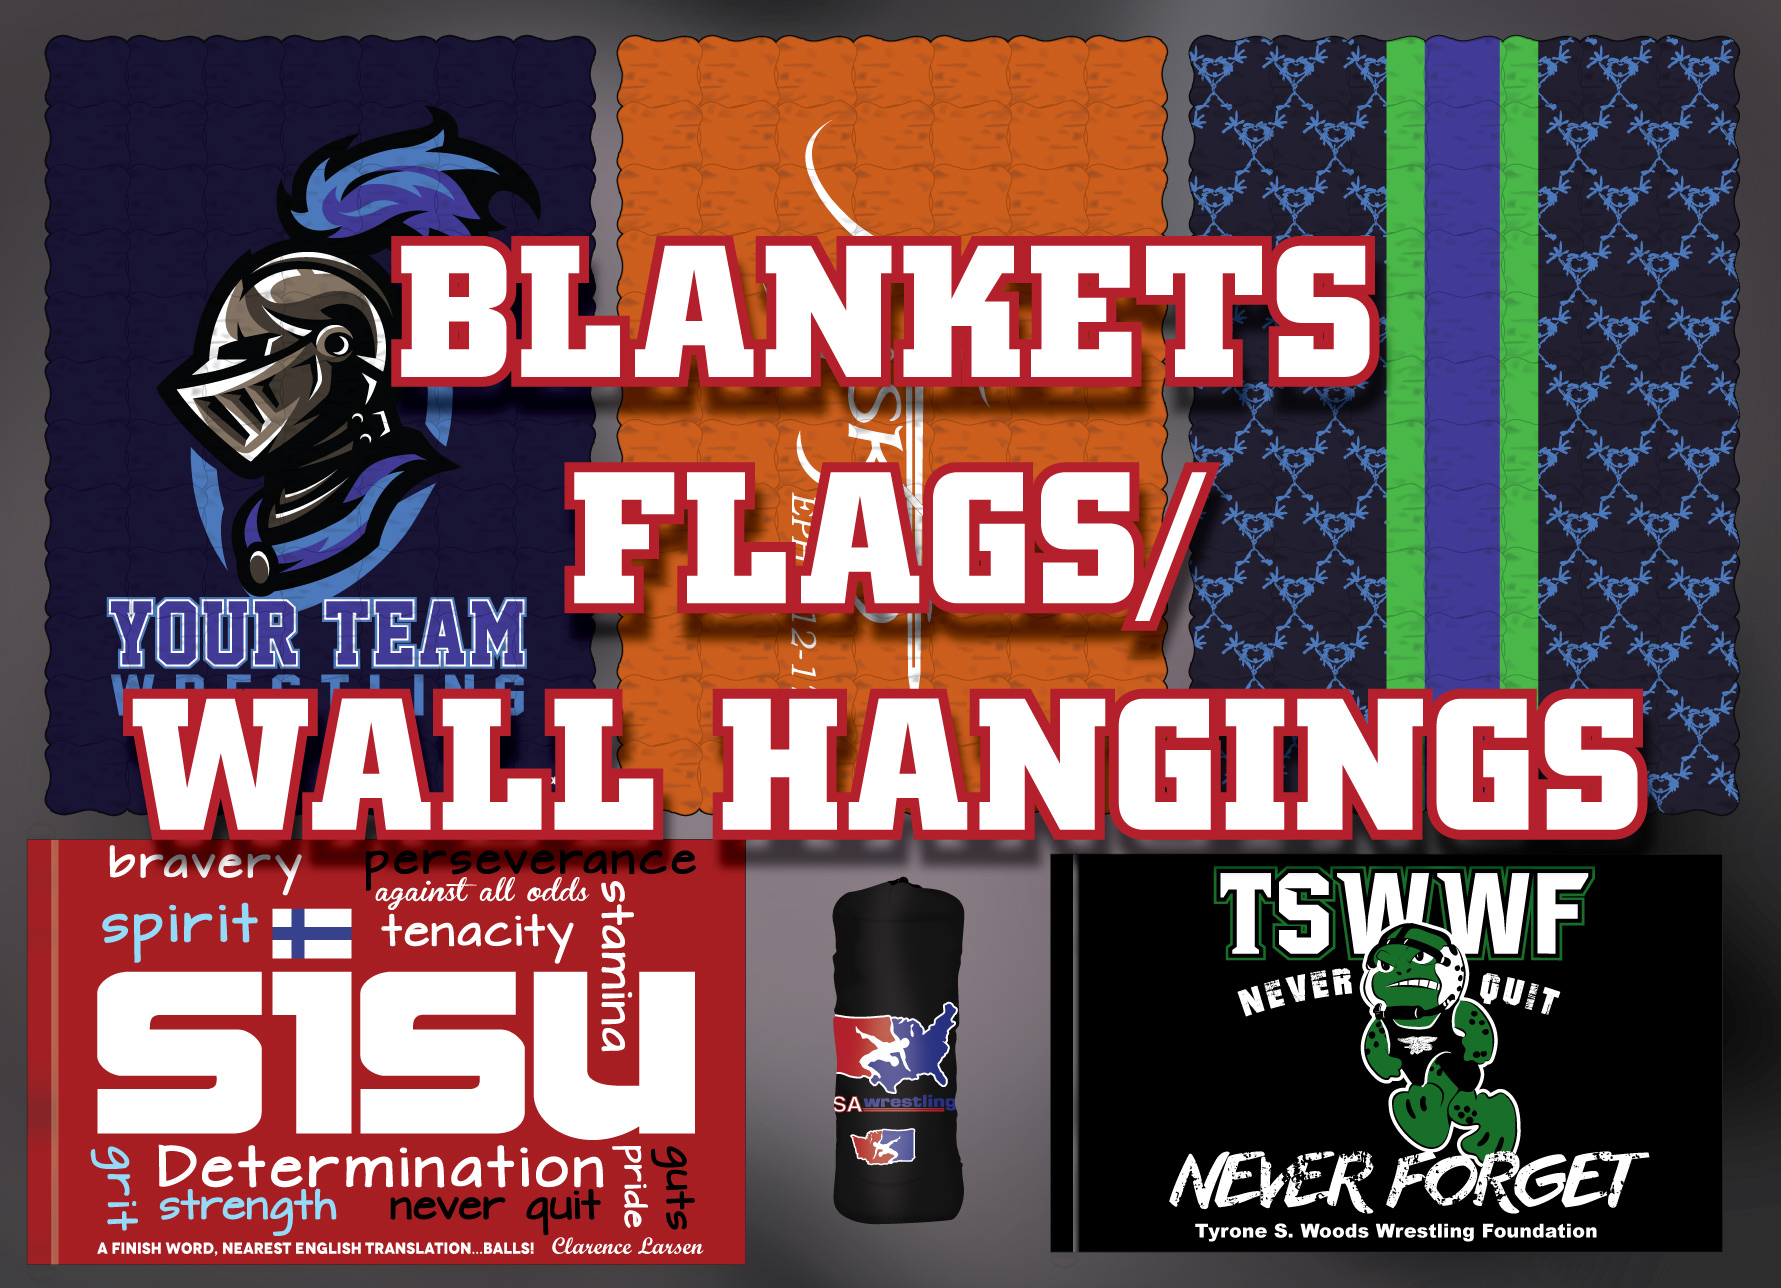 Blankets Flags/Wall Hangings